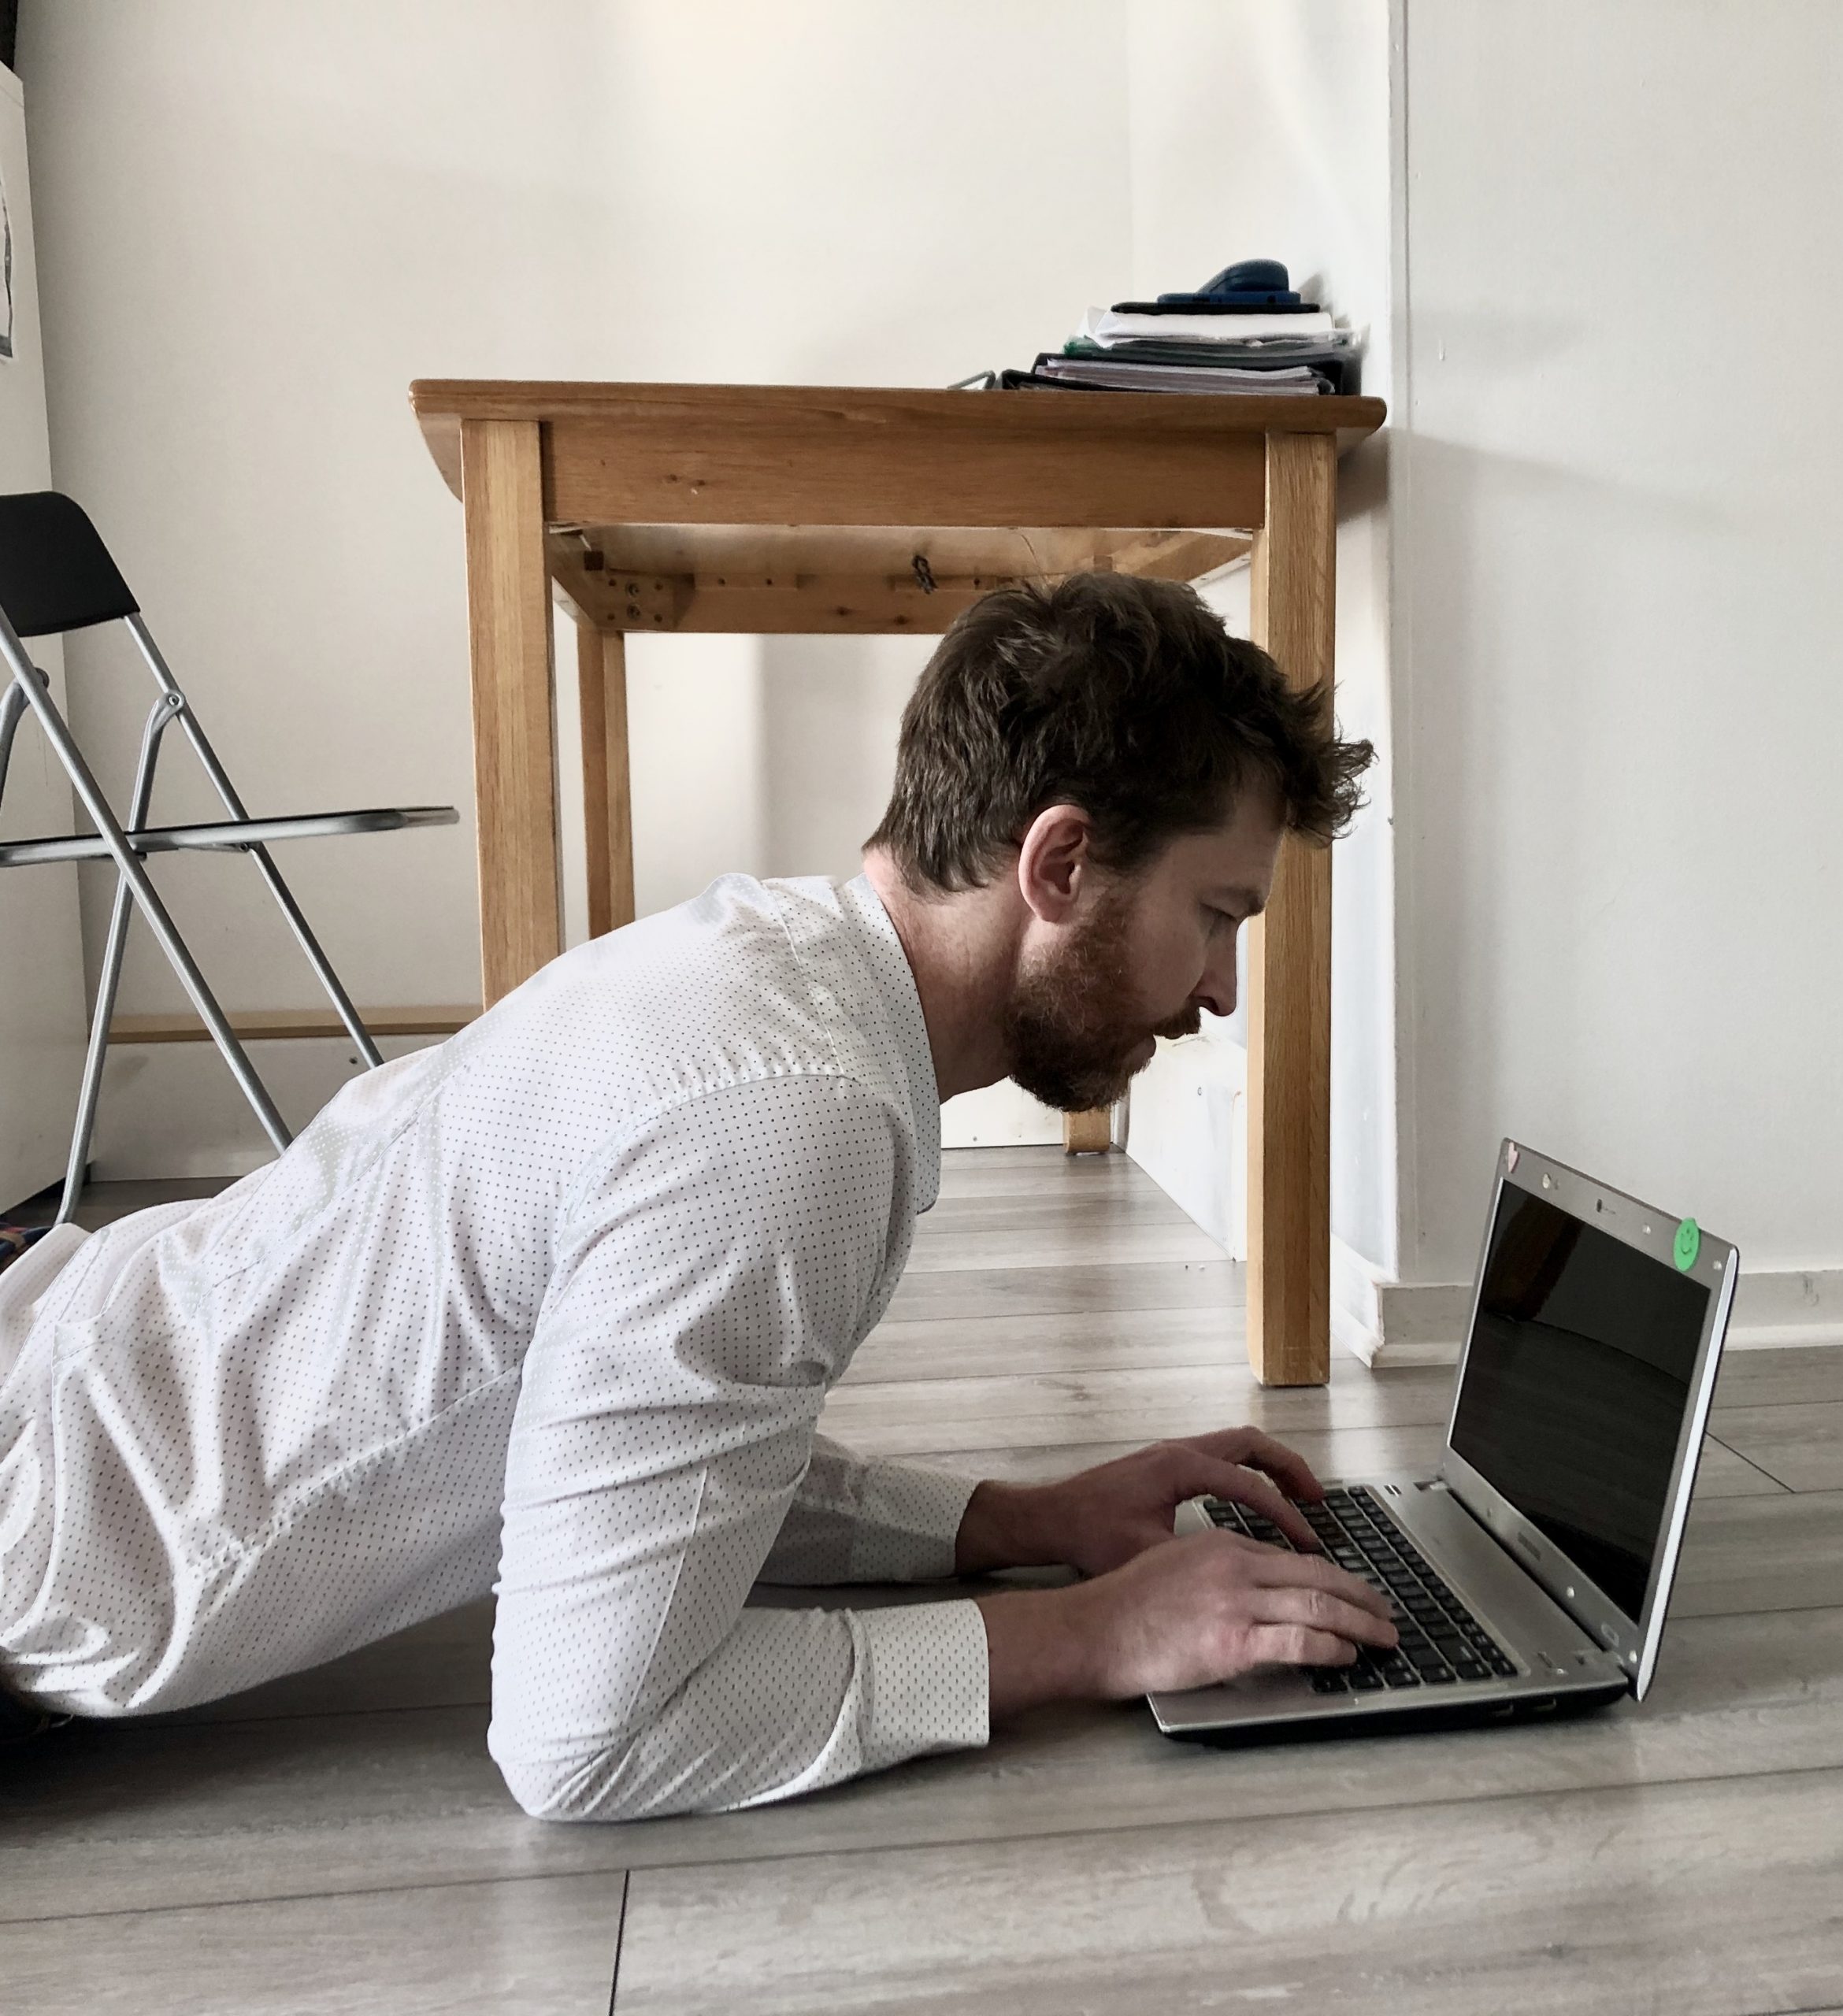 Back pain from working at home? Try these simple tips – By Tom Bradley